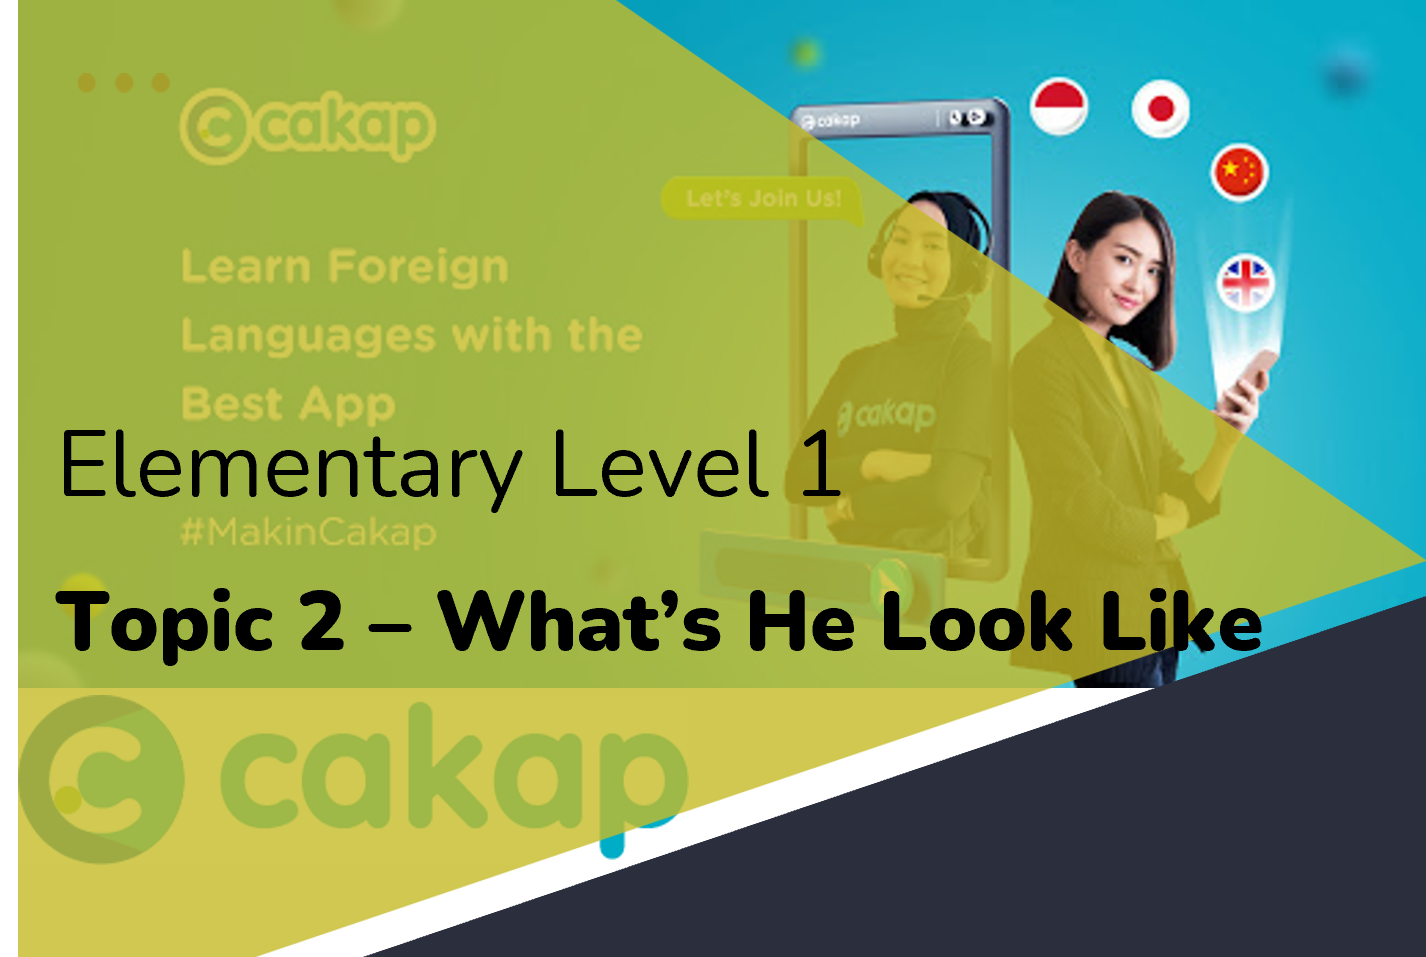 Elementary 1: Topic 2 - What's He Look Like